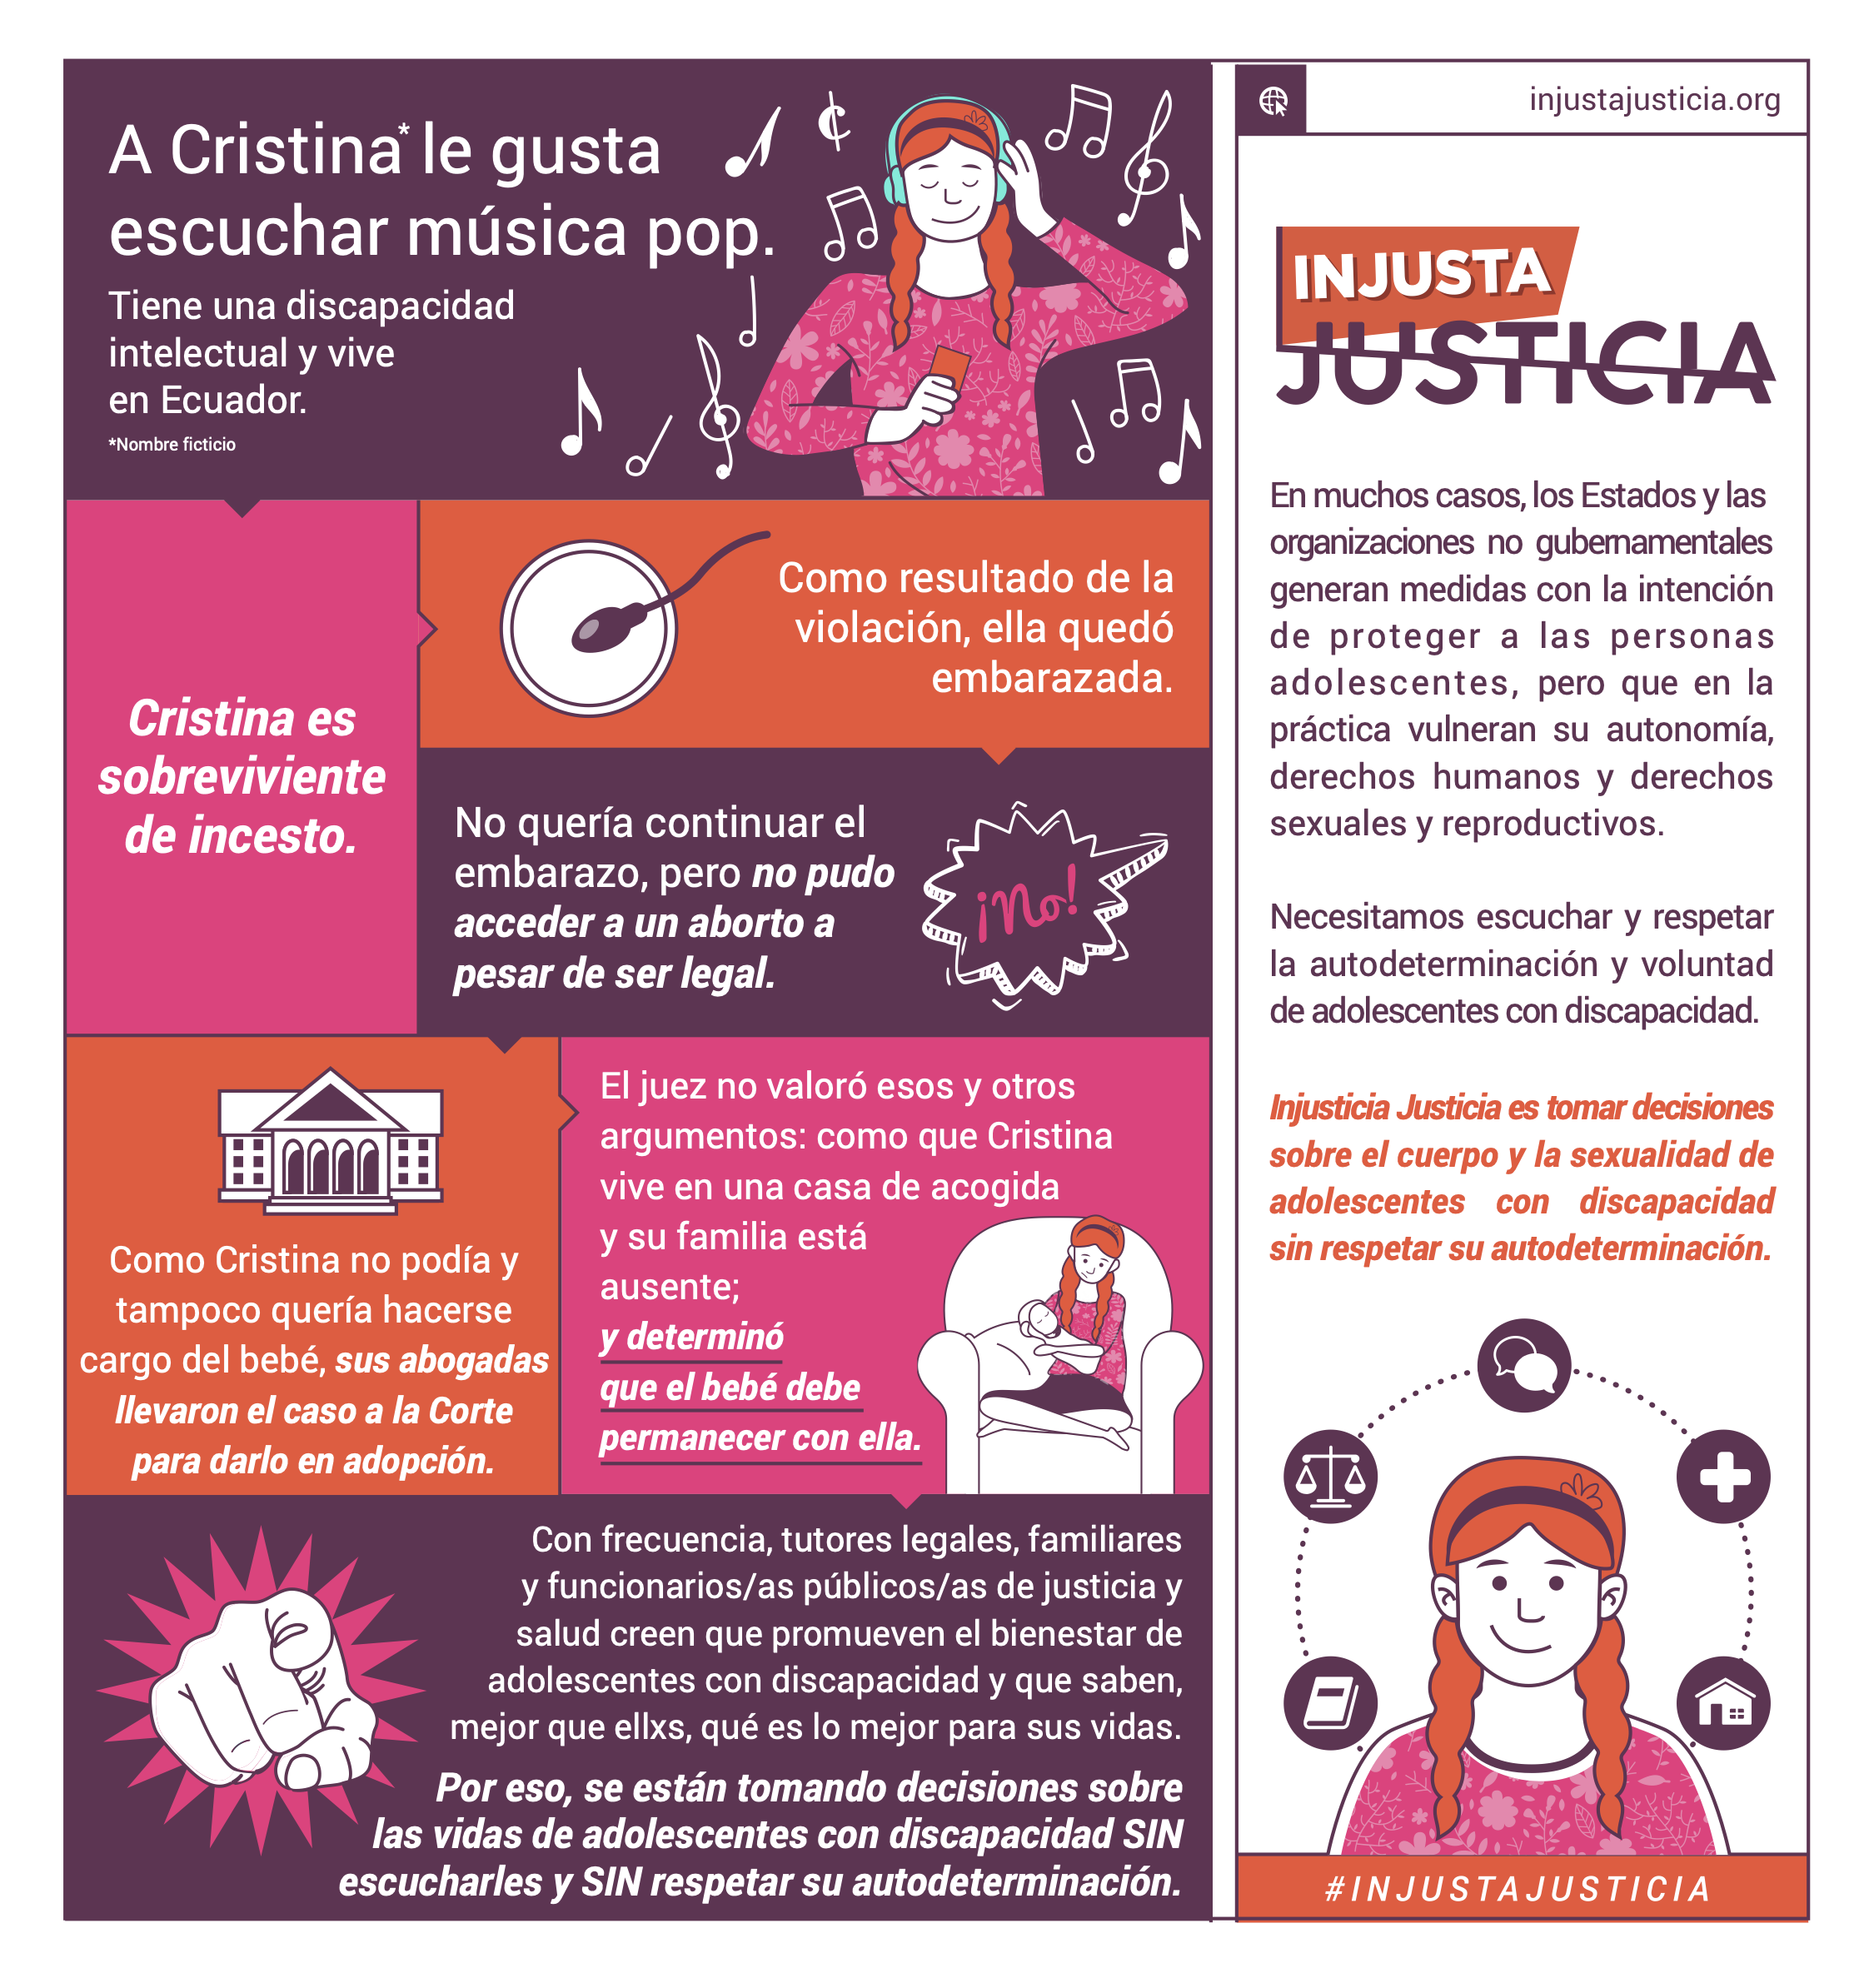 Infographic of Cristina, incest survivor, one of the cases of the Injusta Justicia website.